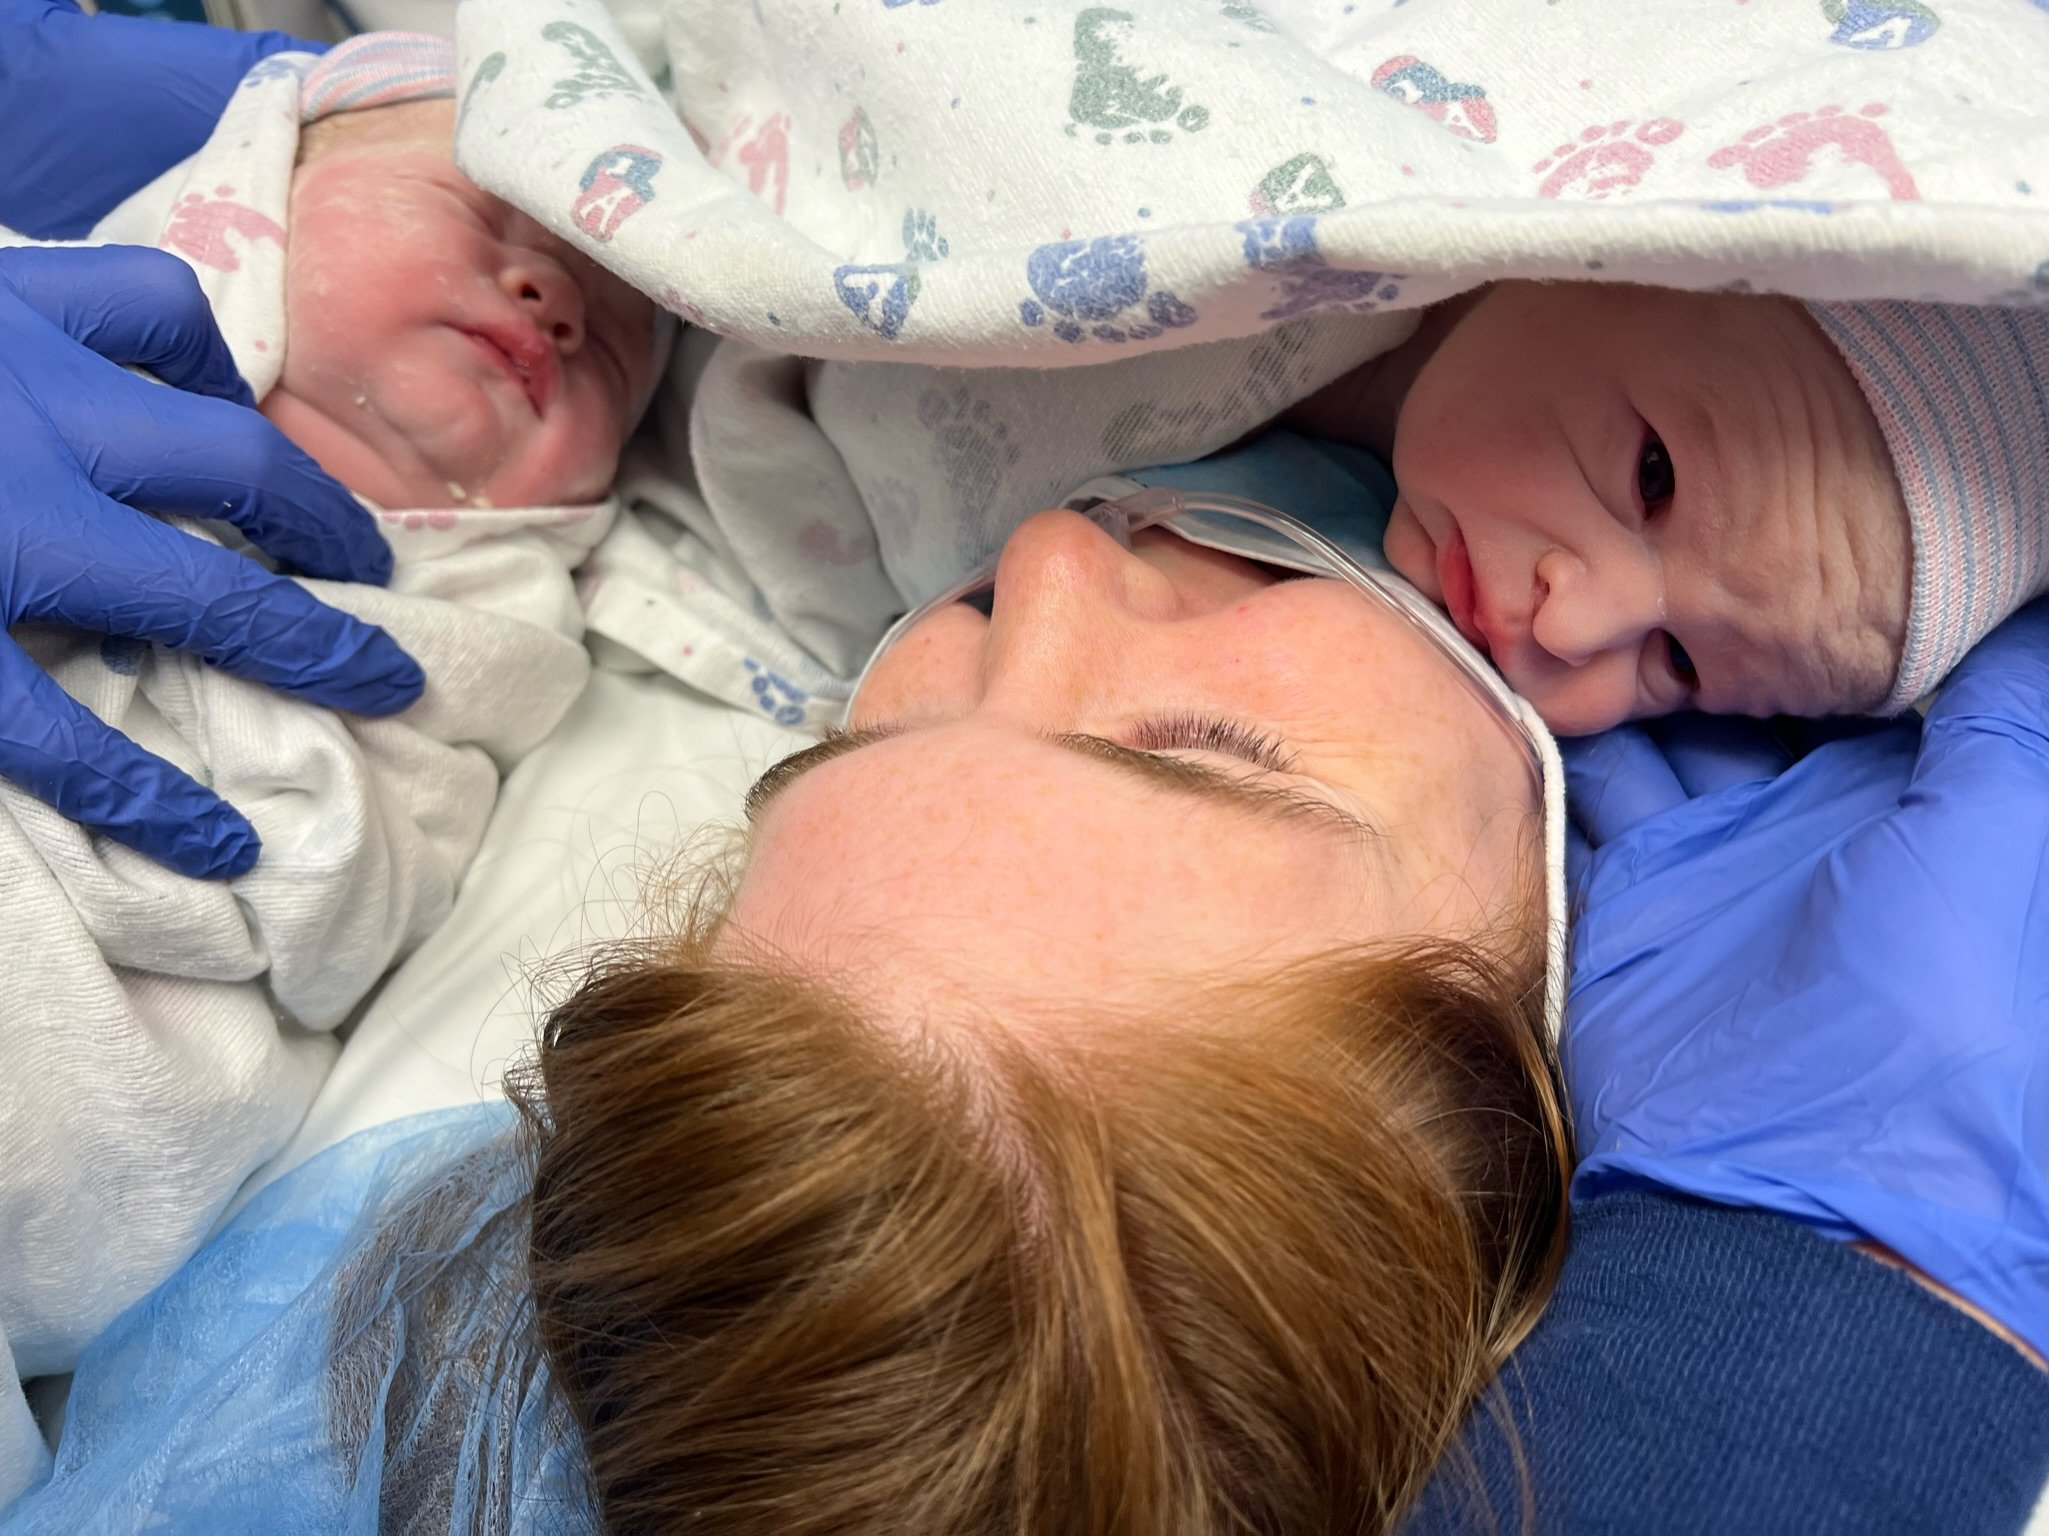 lments of style, c-section awareness month, Cesarean section, c-section with twins: my story, tips, and recovery, la blogger, twin mom, boy girl twins, fraternal twins, what can't you do in a c-section